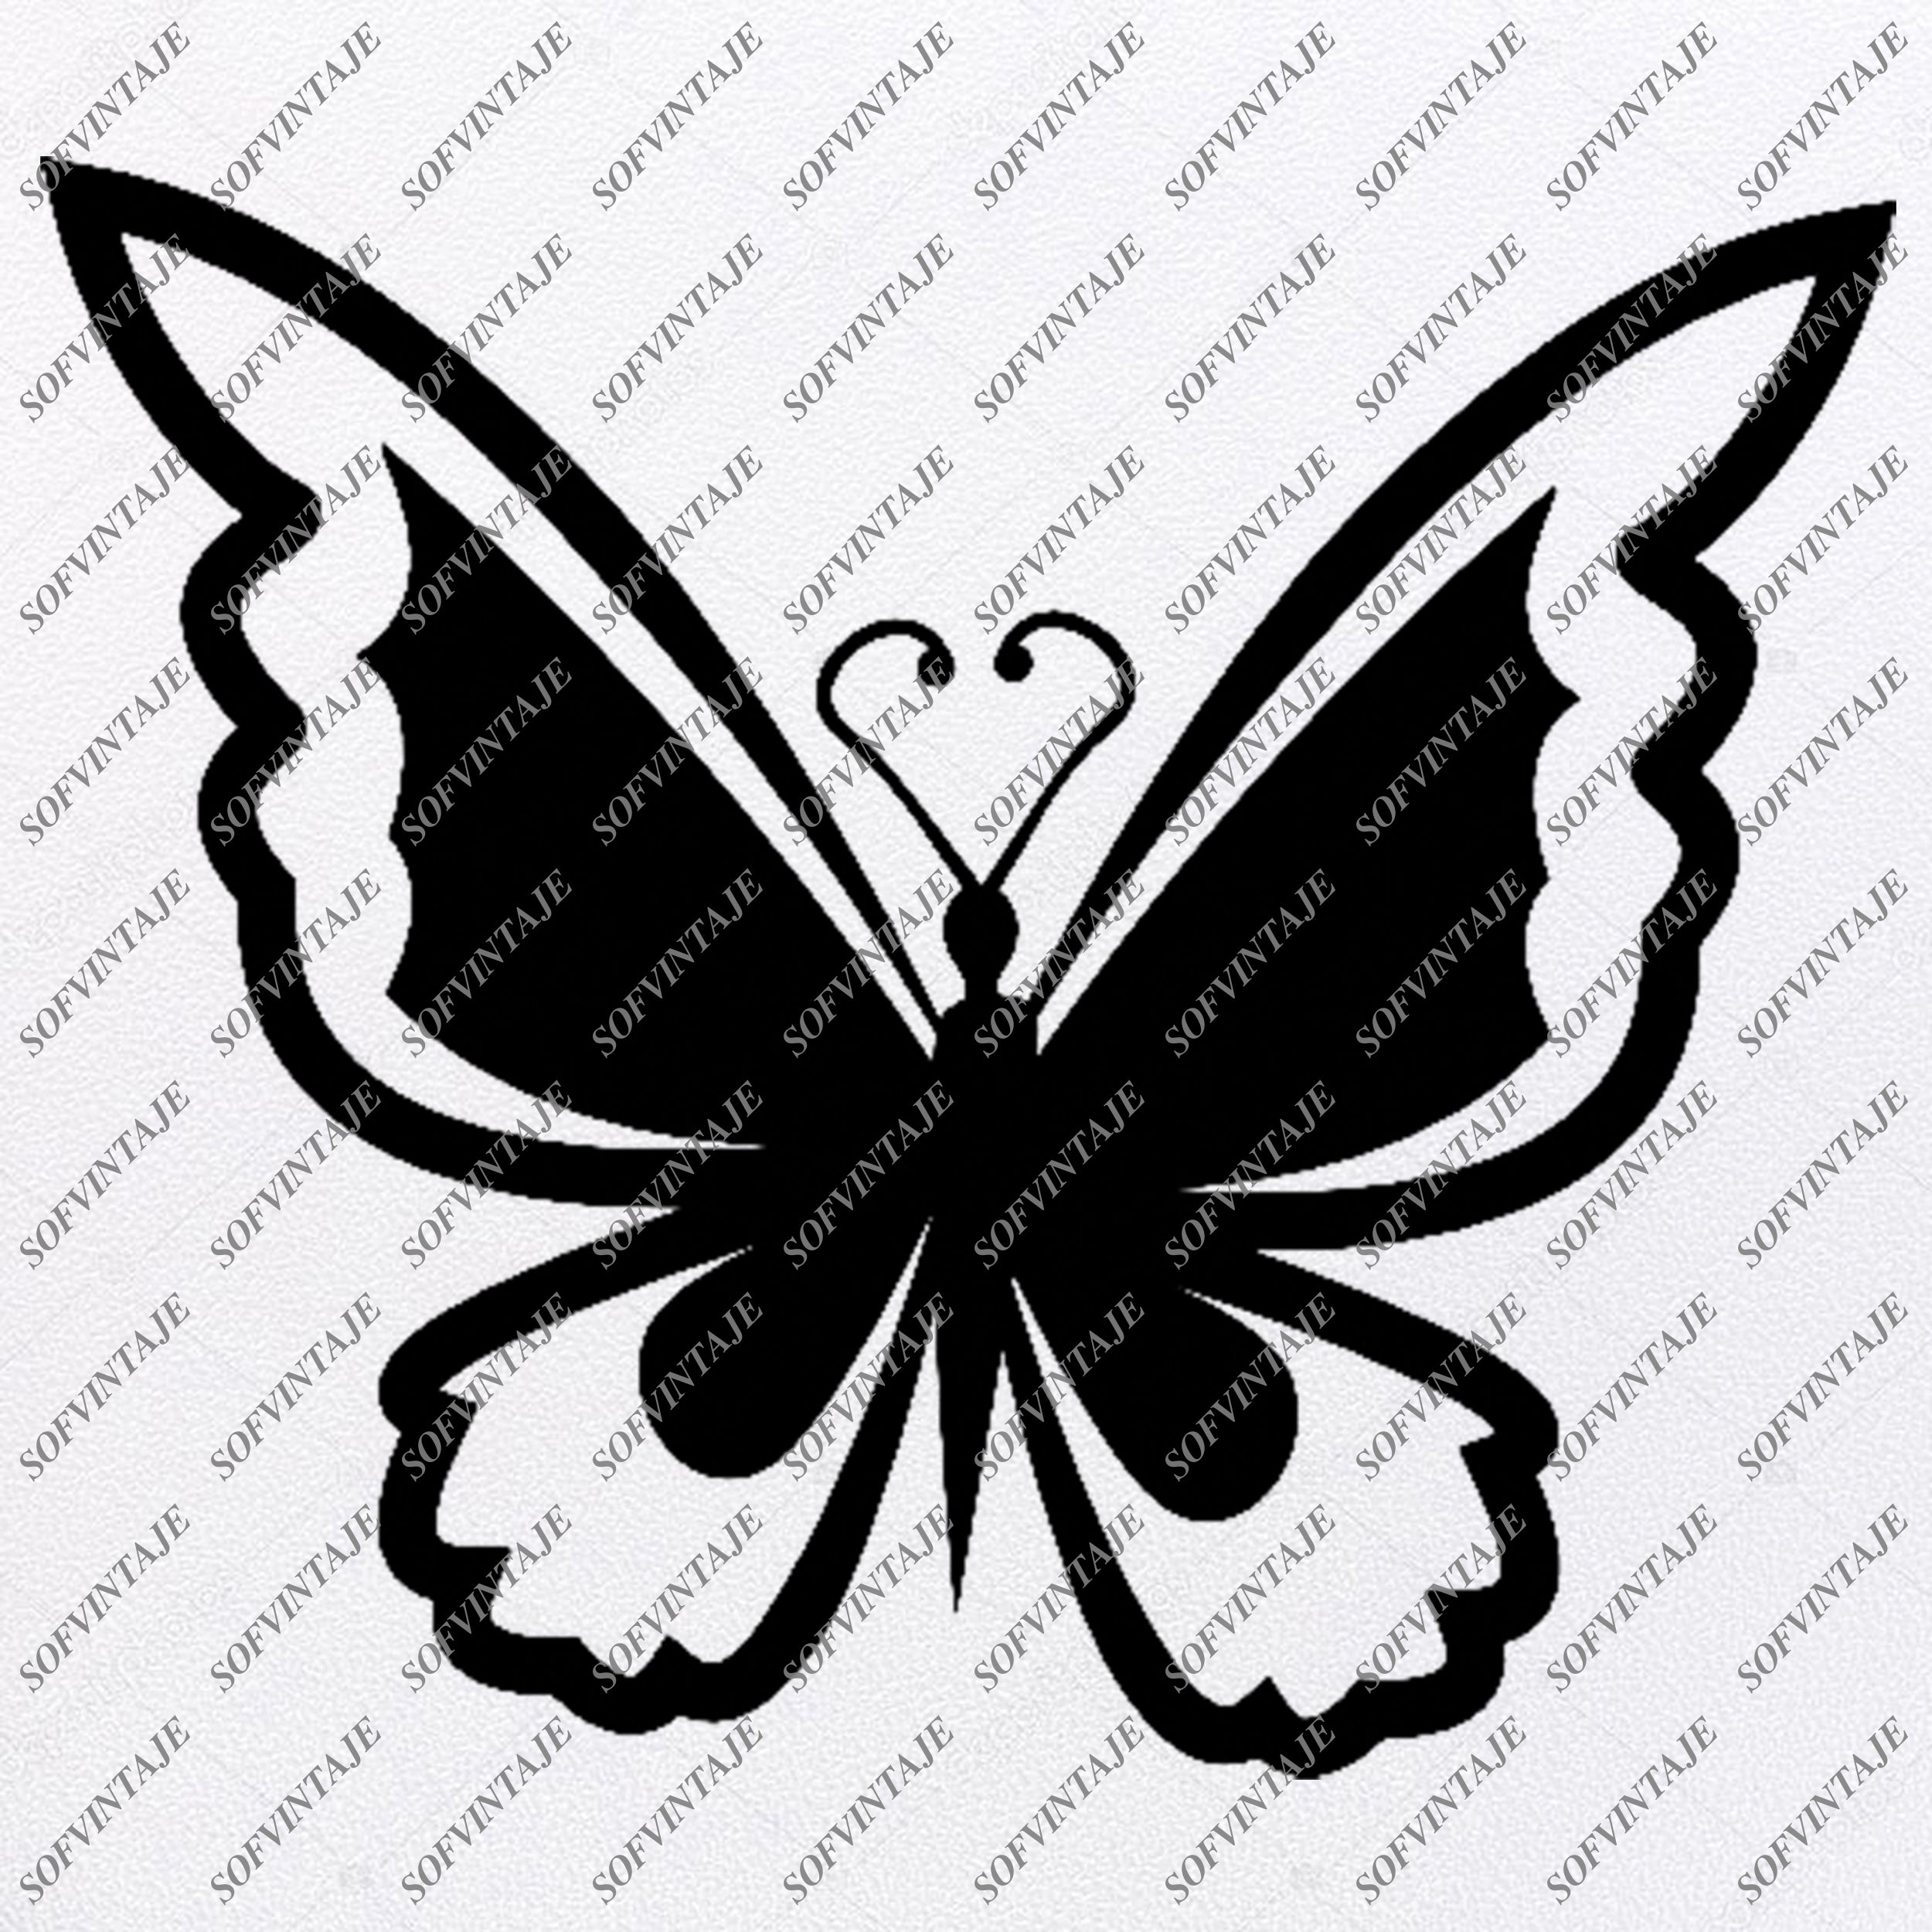 Download Butterfly Silhouette Files Butterfly Clip Art Svg Butterfly Image File Butterfly Clipart Clip Art Art Collectibles